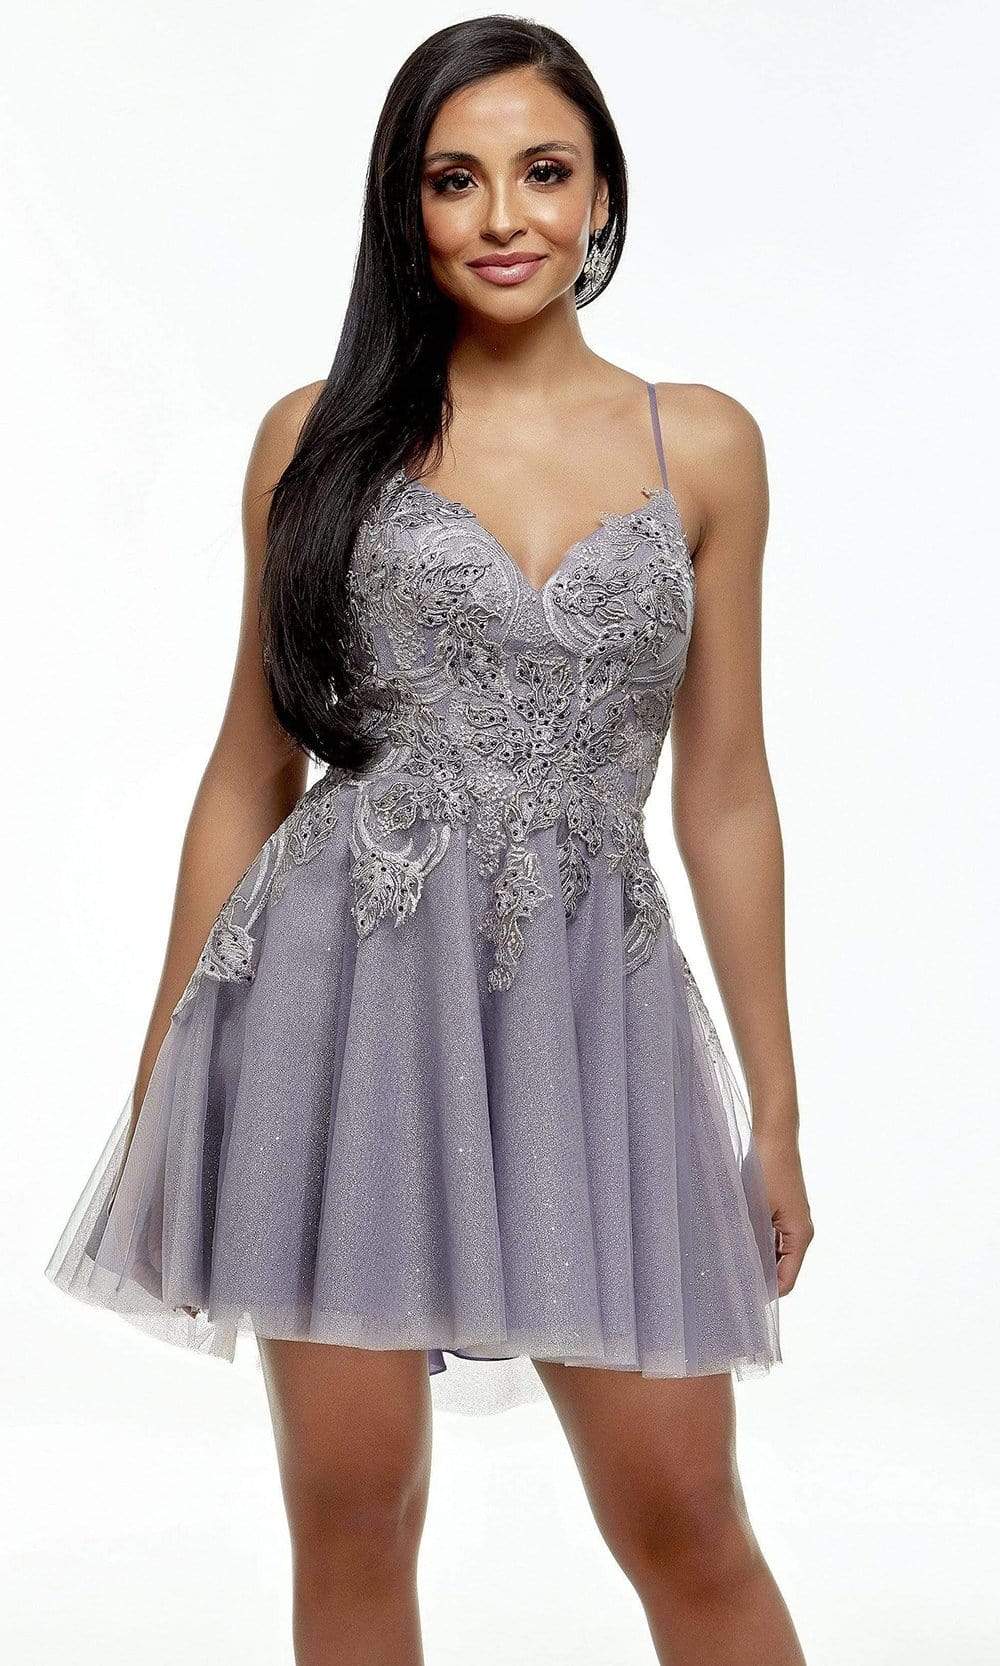 Alyce Paris - 3952 Embroidered A-Line Cocktail Dress Homecoming Dresses 000 / Hydrangea